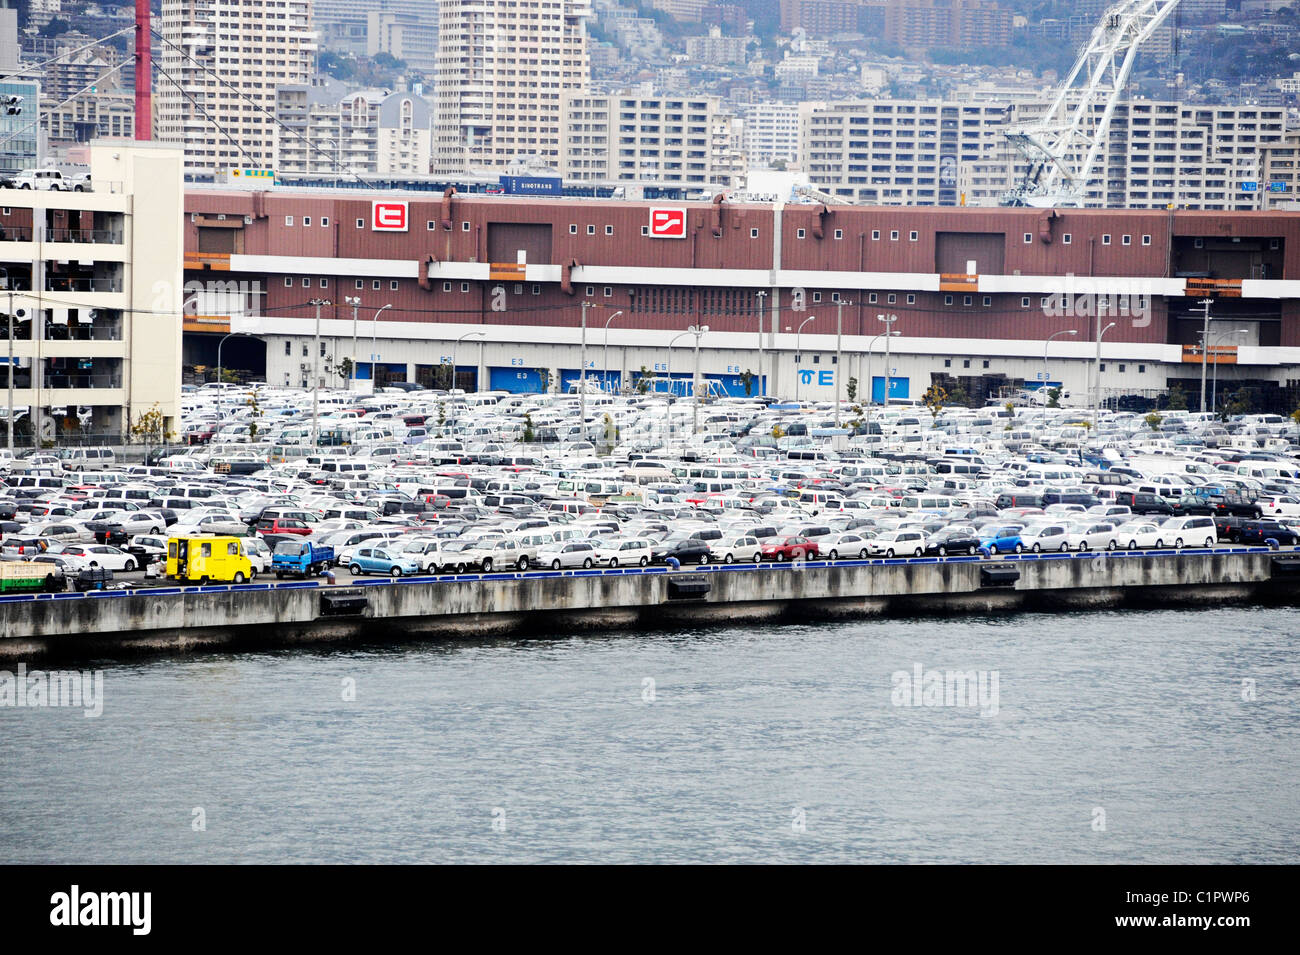 A mass of cars parked at the Port of Kobe dockside, Japan Stock Photo